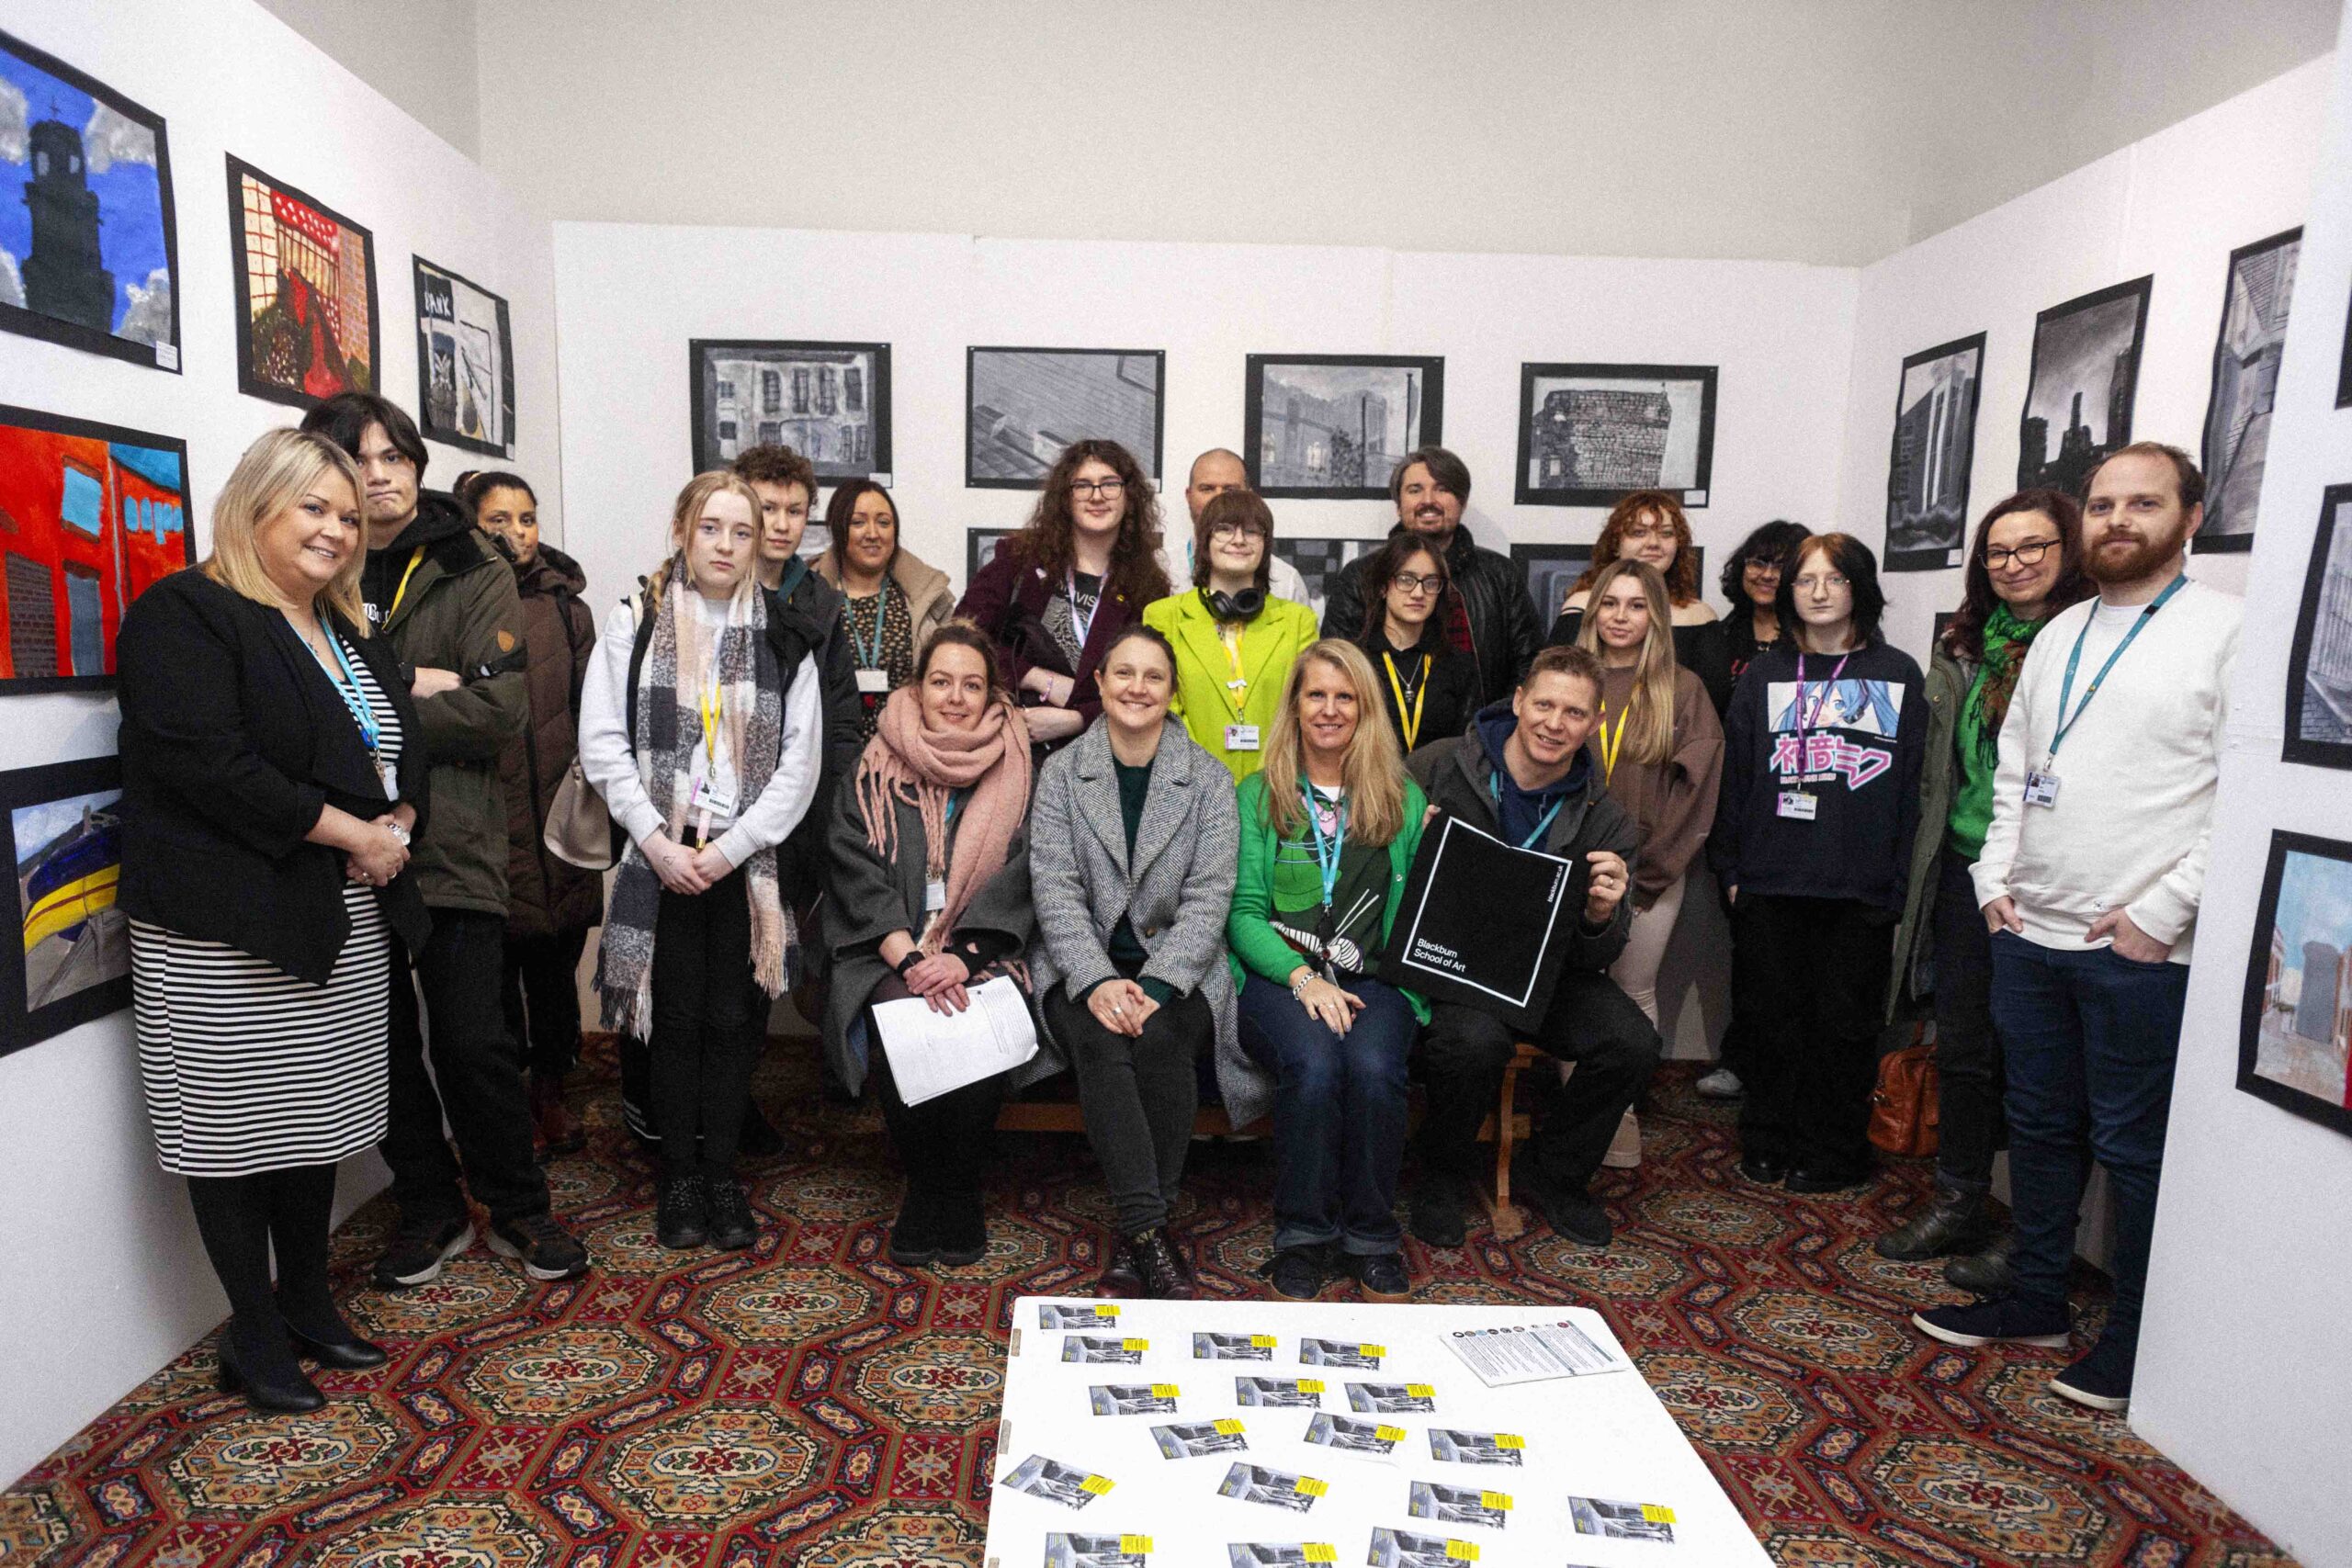 Students, tutors and faculty from Blackburn College for the opening of the L1 Art and Design and A level Fine Art Student Exhibition at the opening on Thursday 8th Feb